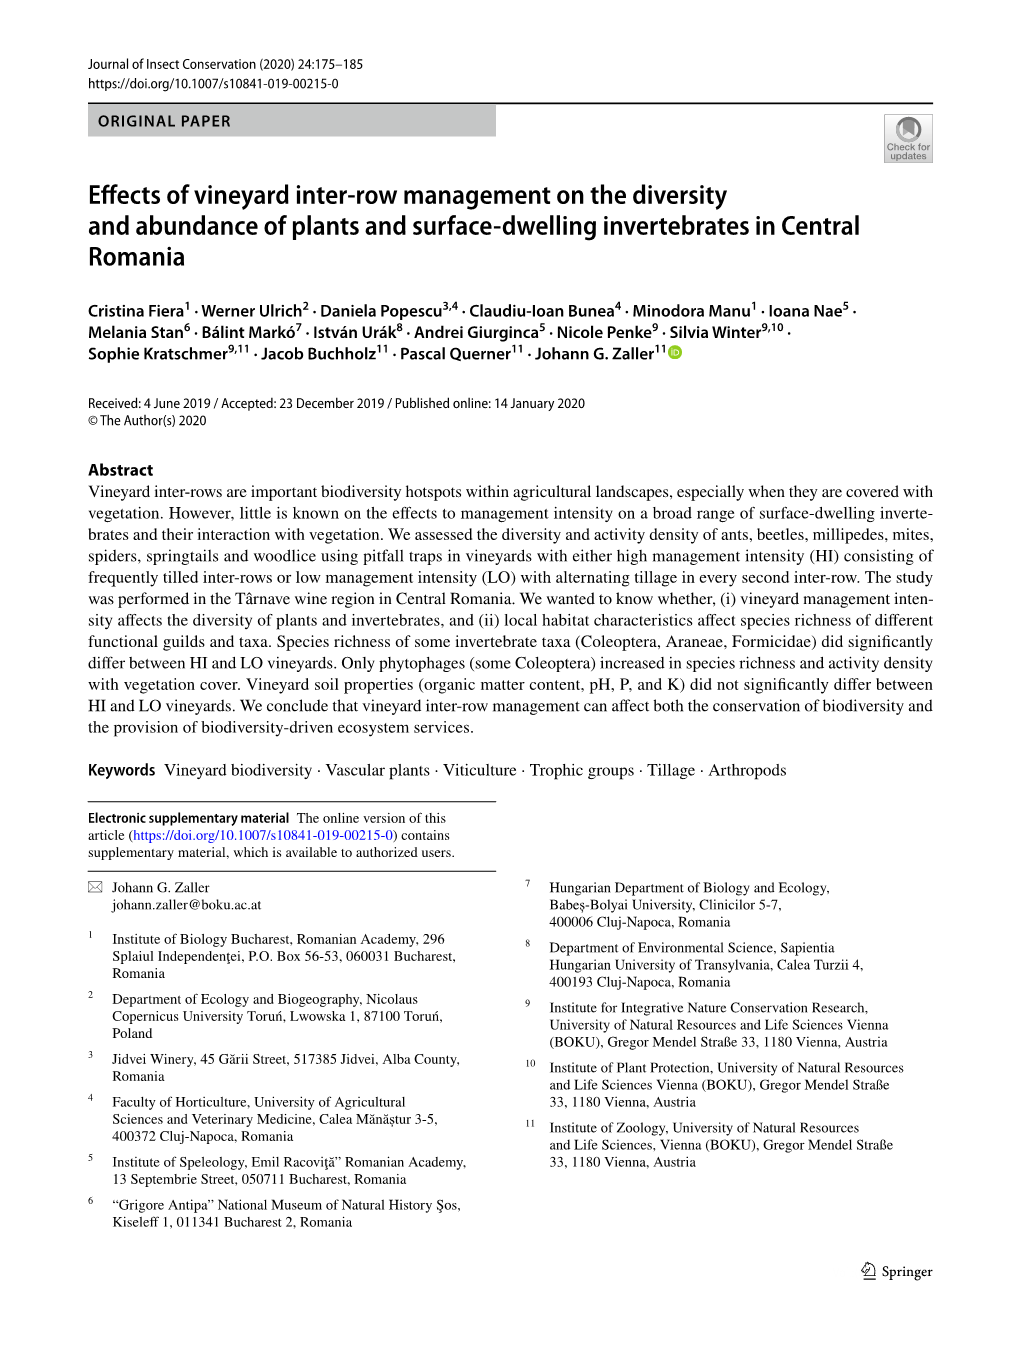 Effects of Vineyard Inter-Row Management on the Diversity And